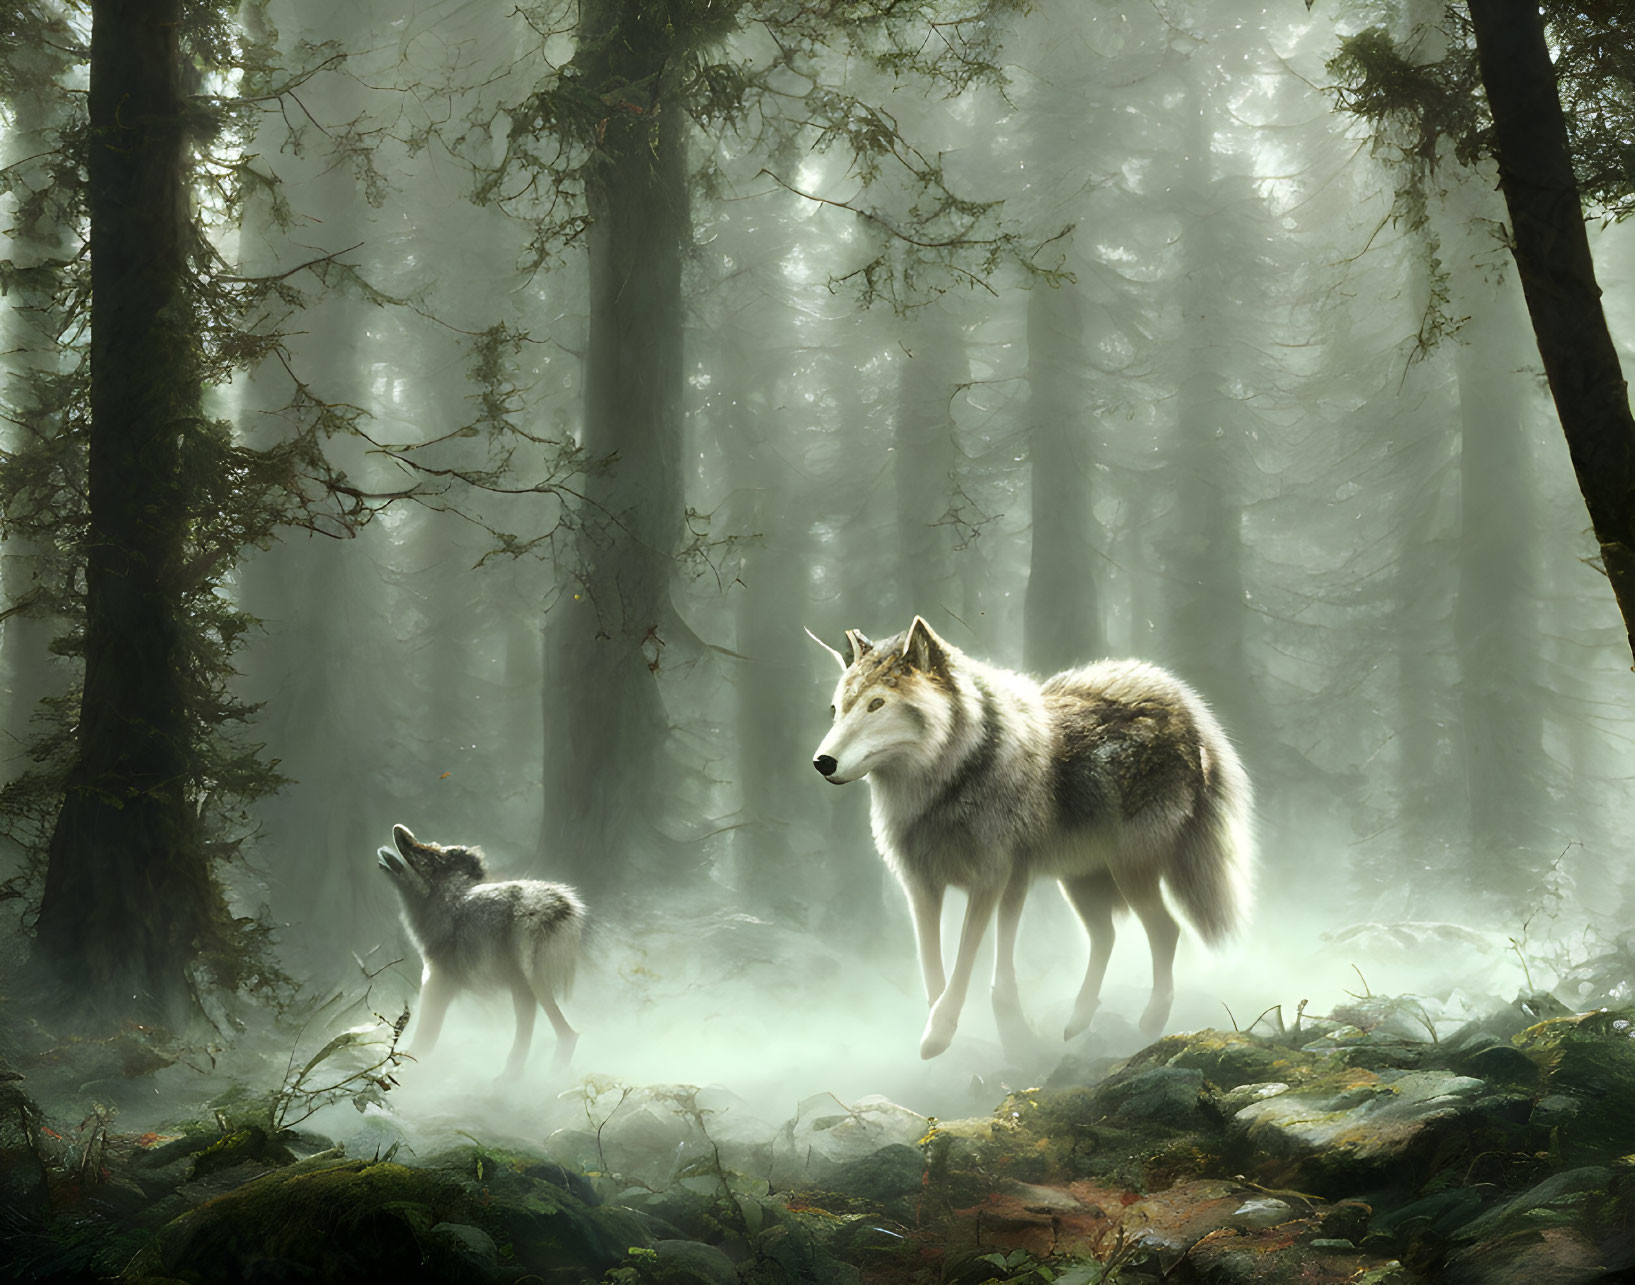 Mystical forest scene with two wolves and sunbeams